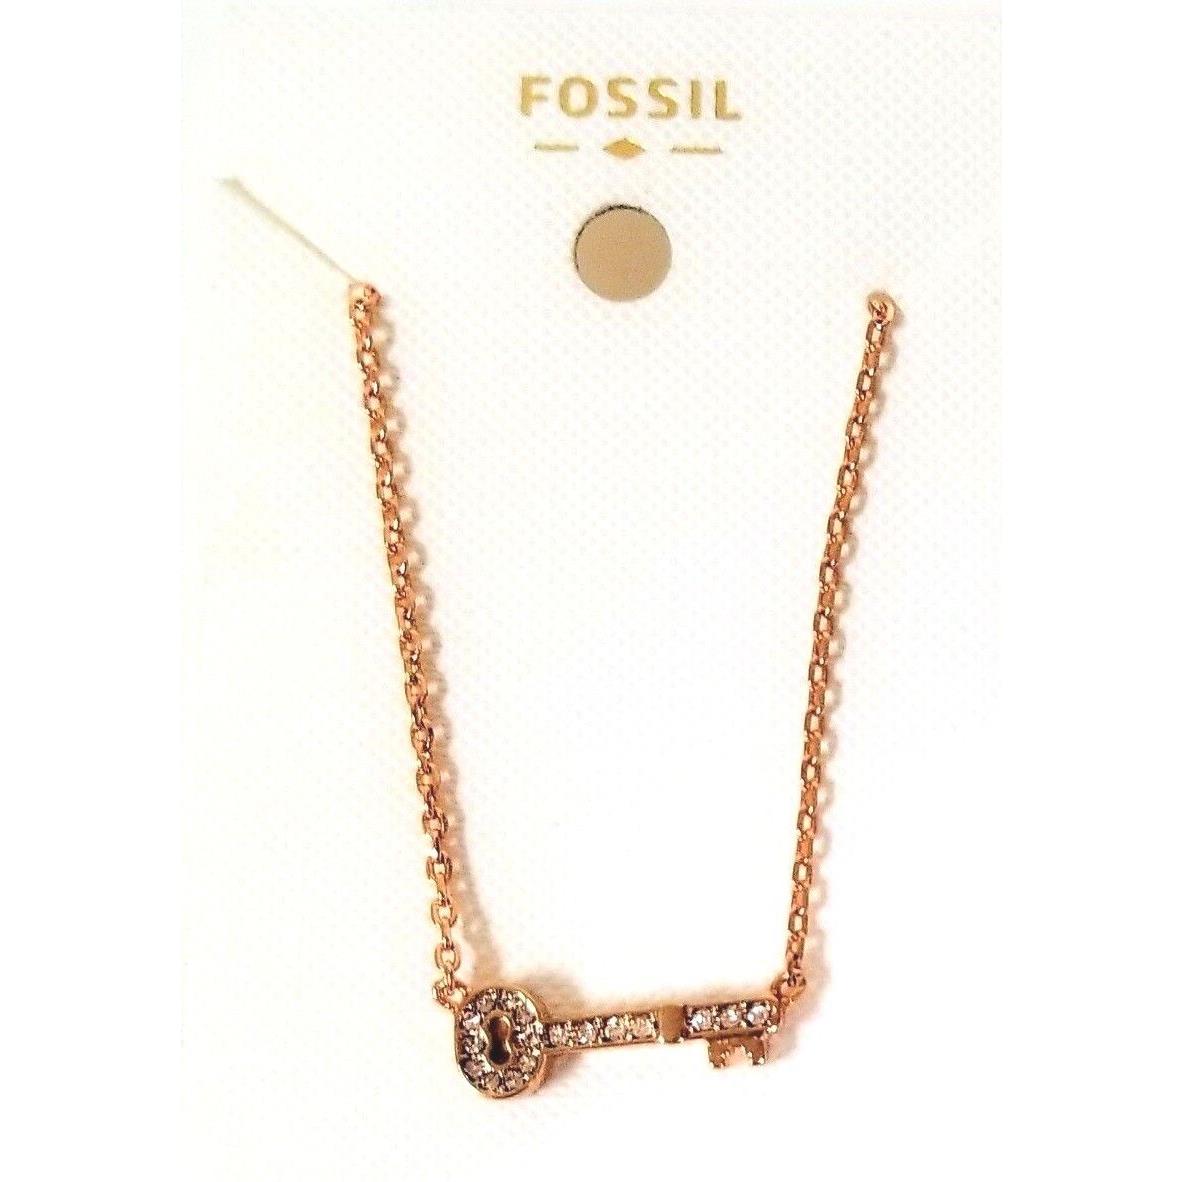 New-fossil Rose Gold Tone Key+crystal Pave Charms+chain NECKLACE-JOA00325791